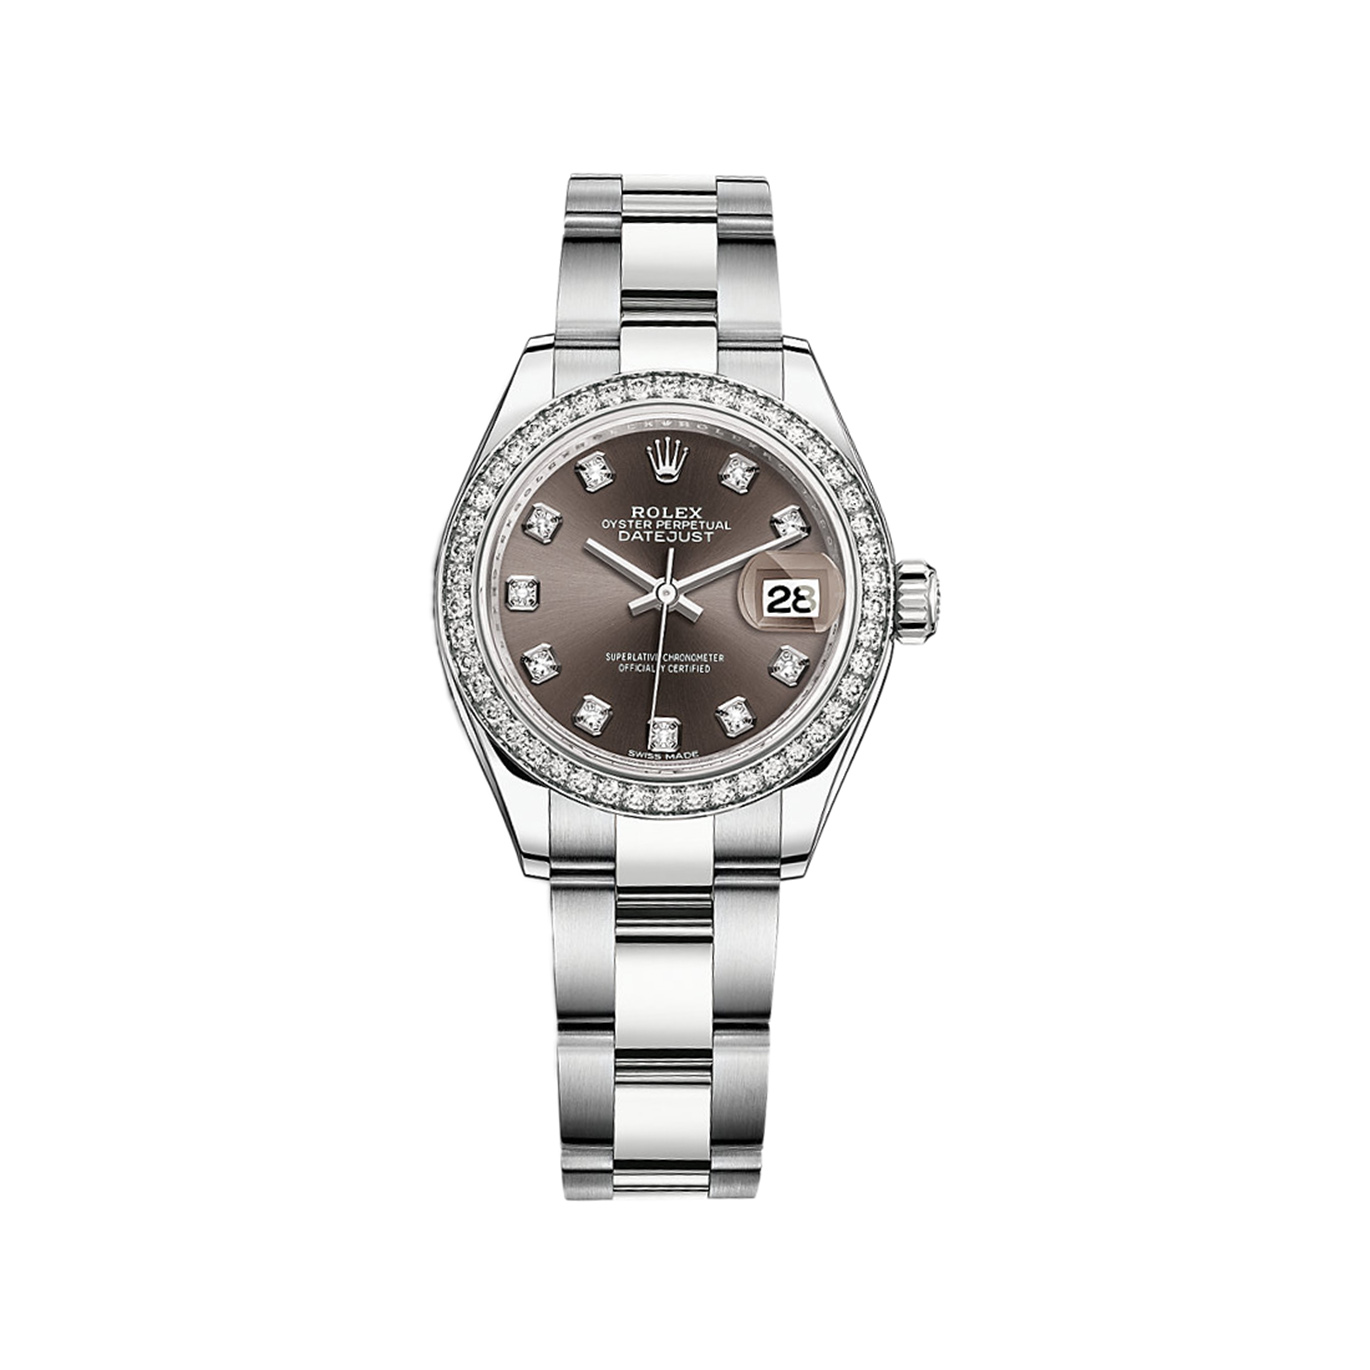 Lady-Datejust 28 279384RBR White Gold & Stainless Steel Watch (Dark Grey Set with Diamonds) - Click Image to Close